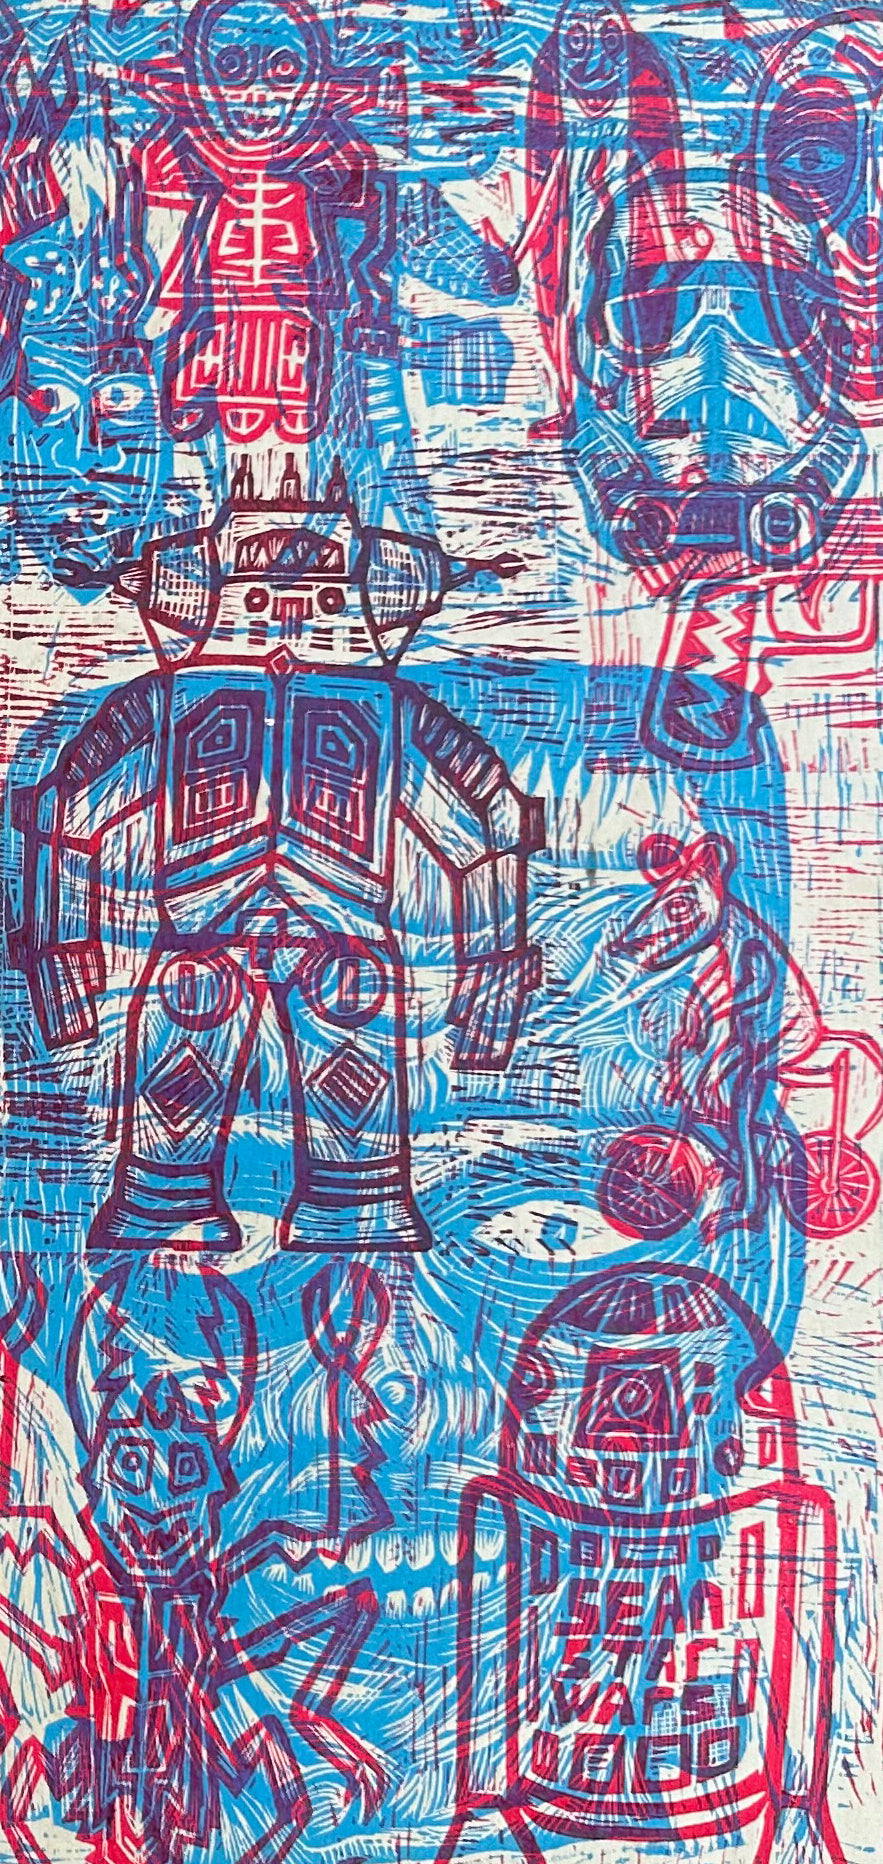 Multiple Red and Blue  Woodcuts Printed on Wooden Panel (Panel A)